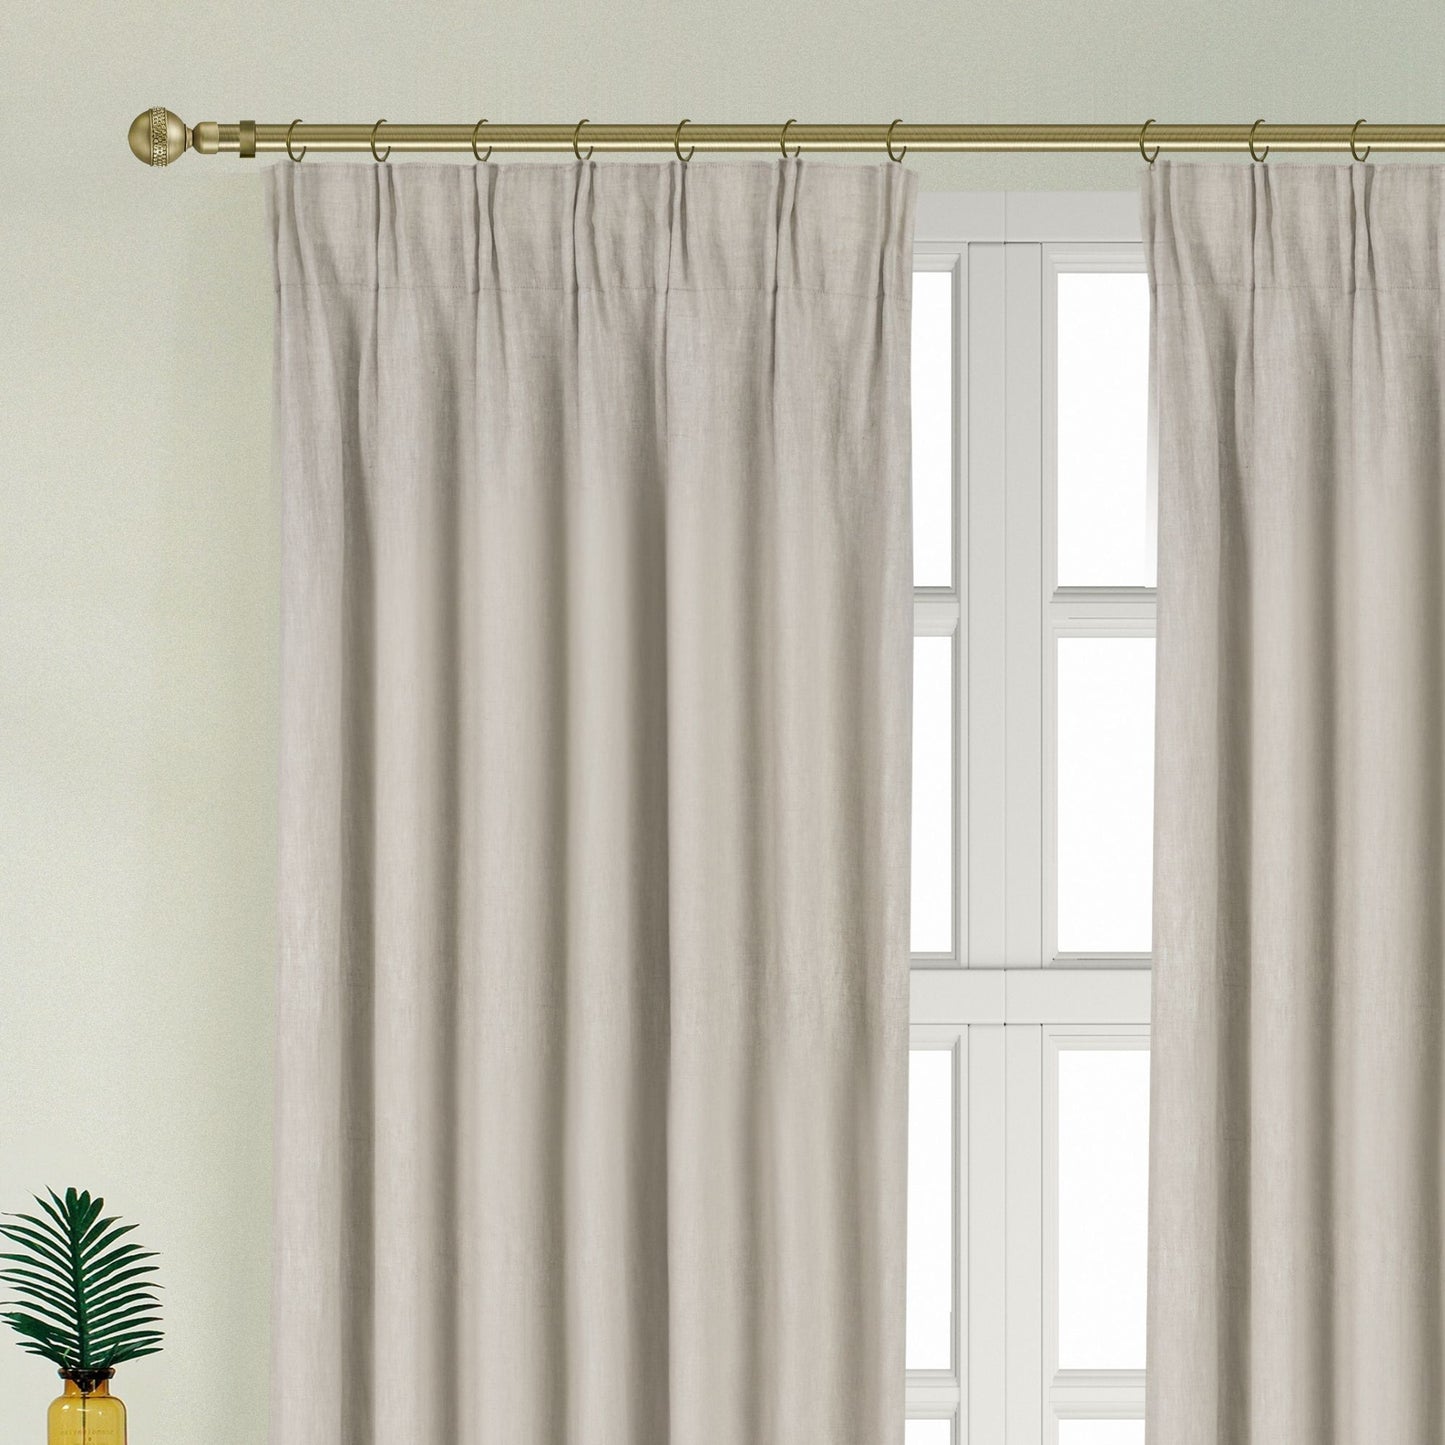 Newport Blackout Curtains for Bedroom, Linen Curtains for Living Room, Window Curtains, Room Darkening Curtains 96 Inches Long, Greige